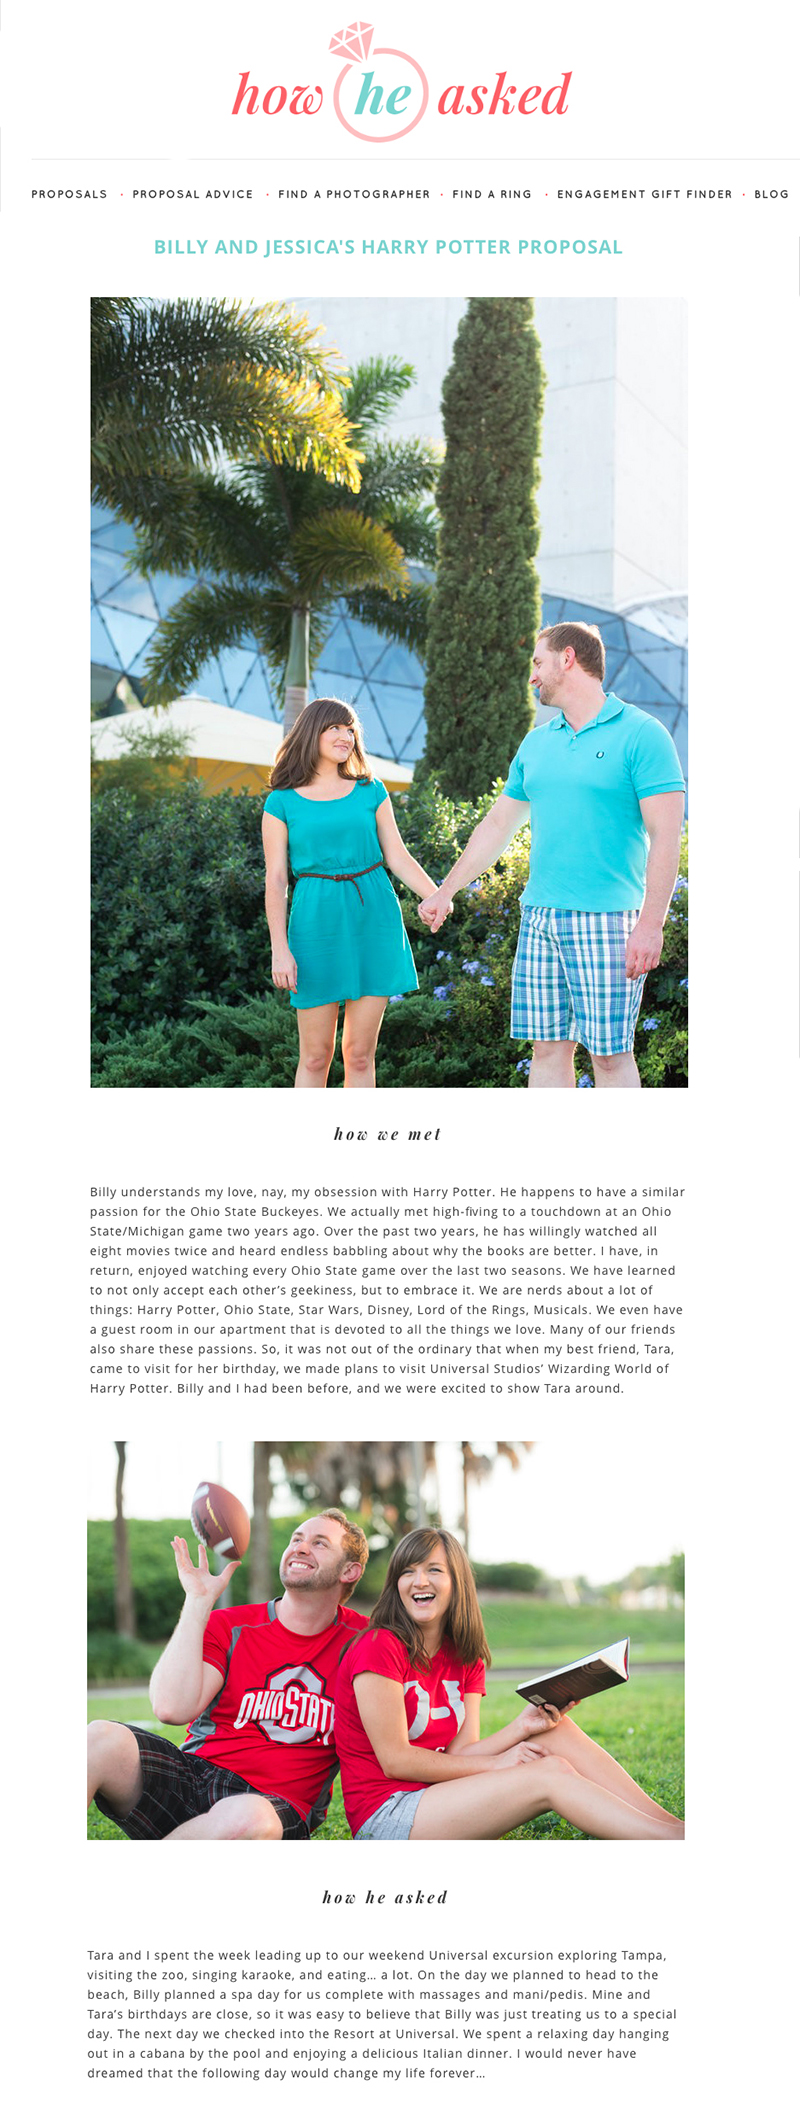 caroline-and-evan-photography-published-on-how-he-asked